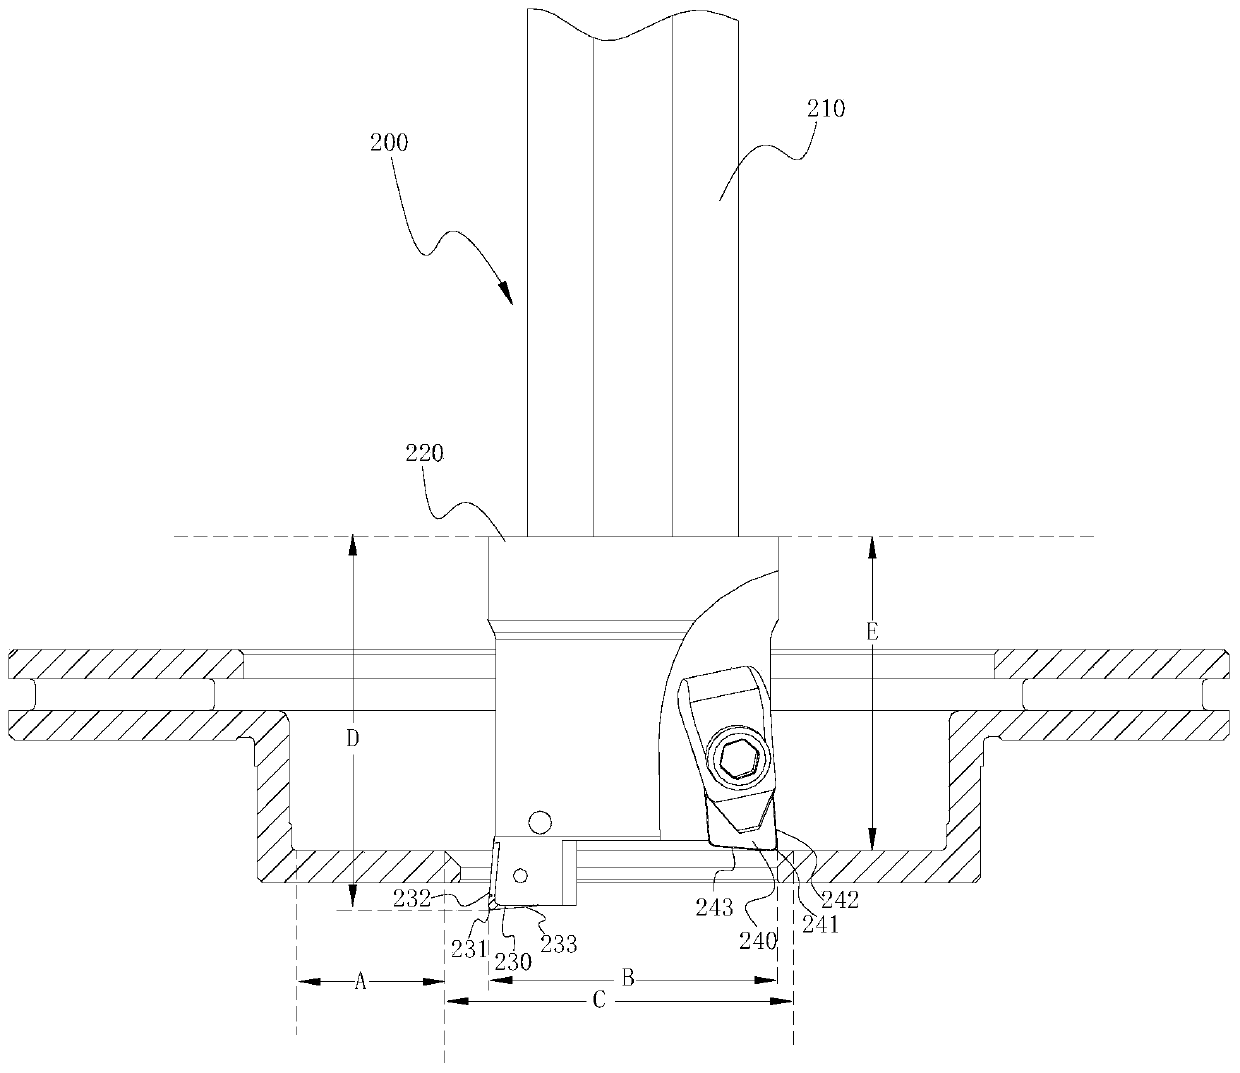 Production process of brake disc using turning tool